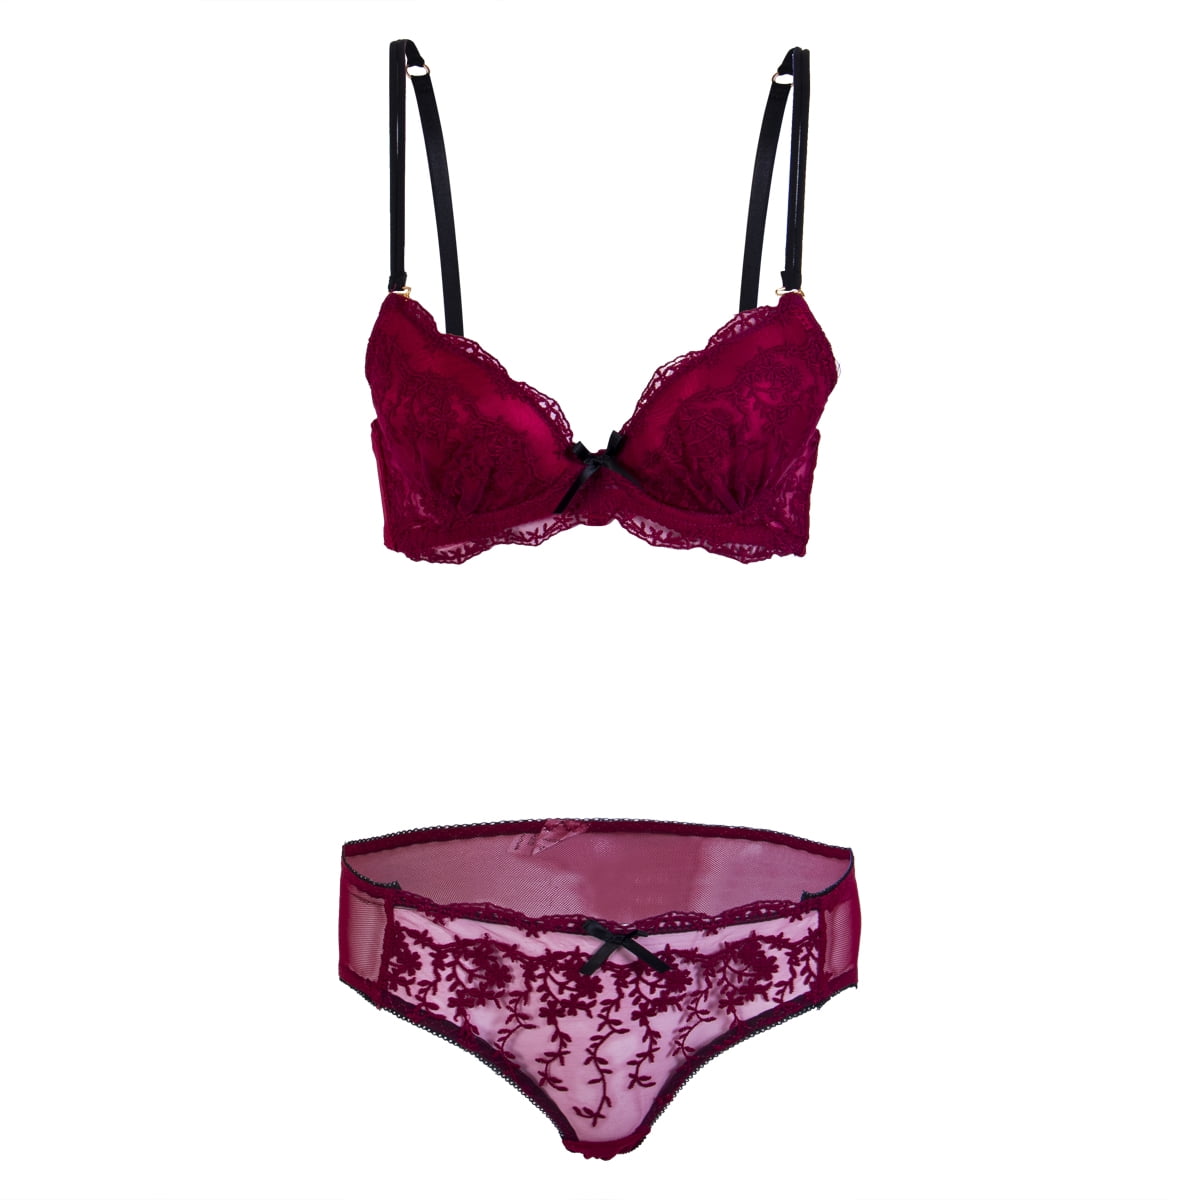 Women Push Up Lace Bra Panty Set, Embroidery Deep V Lingerie Knicker,  Exquisite Valentine's Day Gifts 